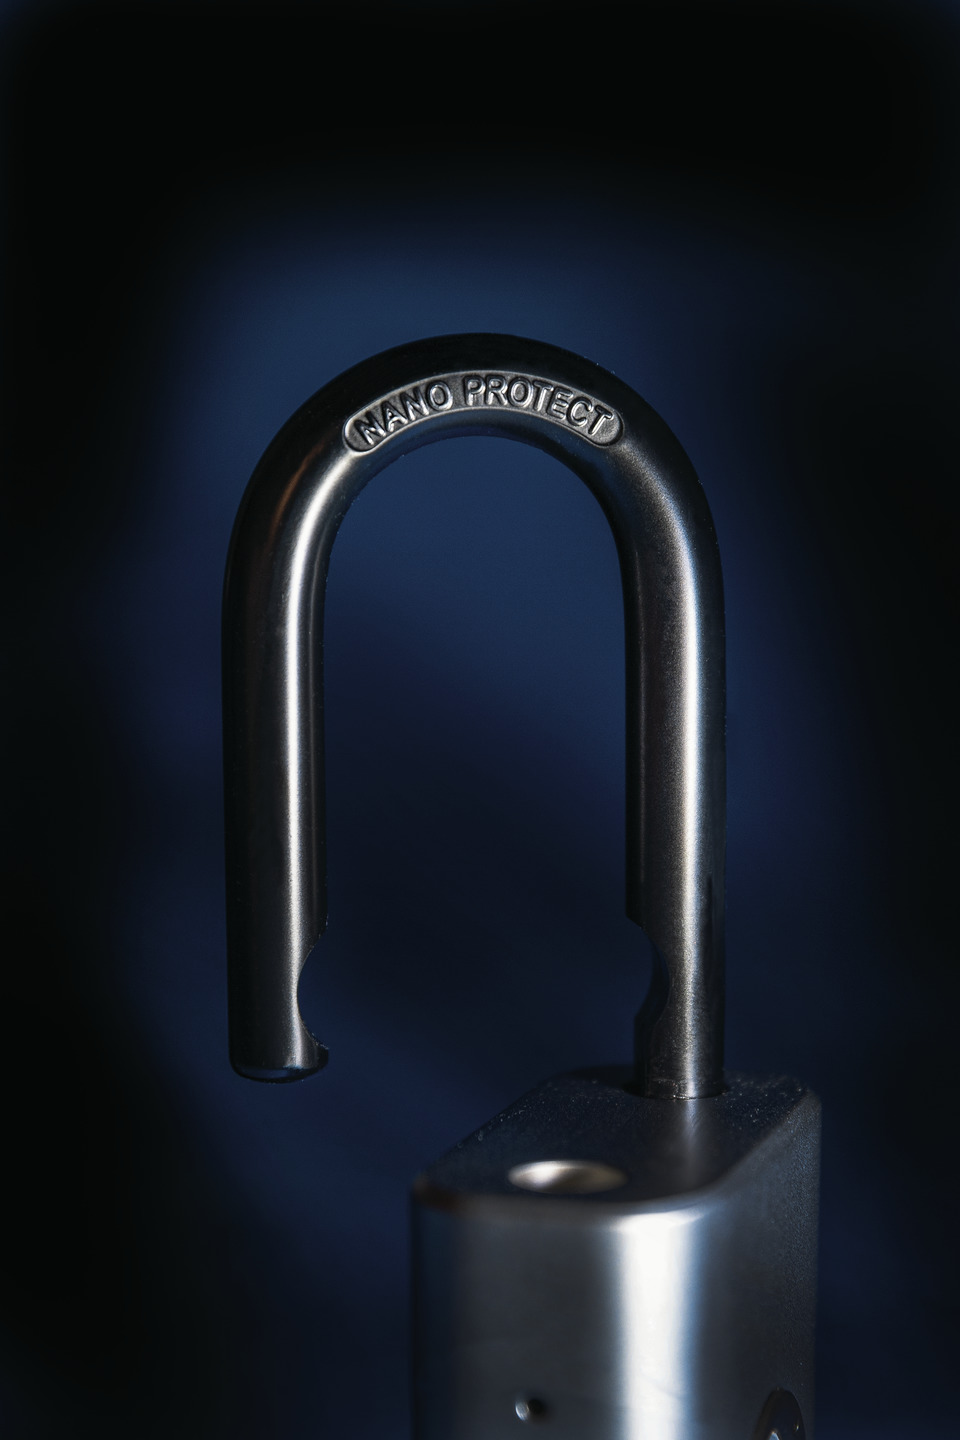 Application example - ABUS Touch™ 57